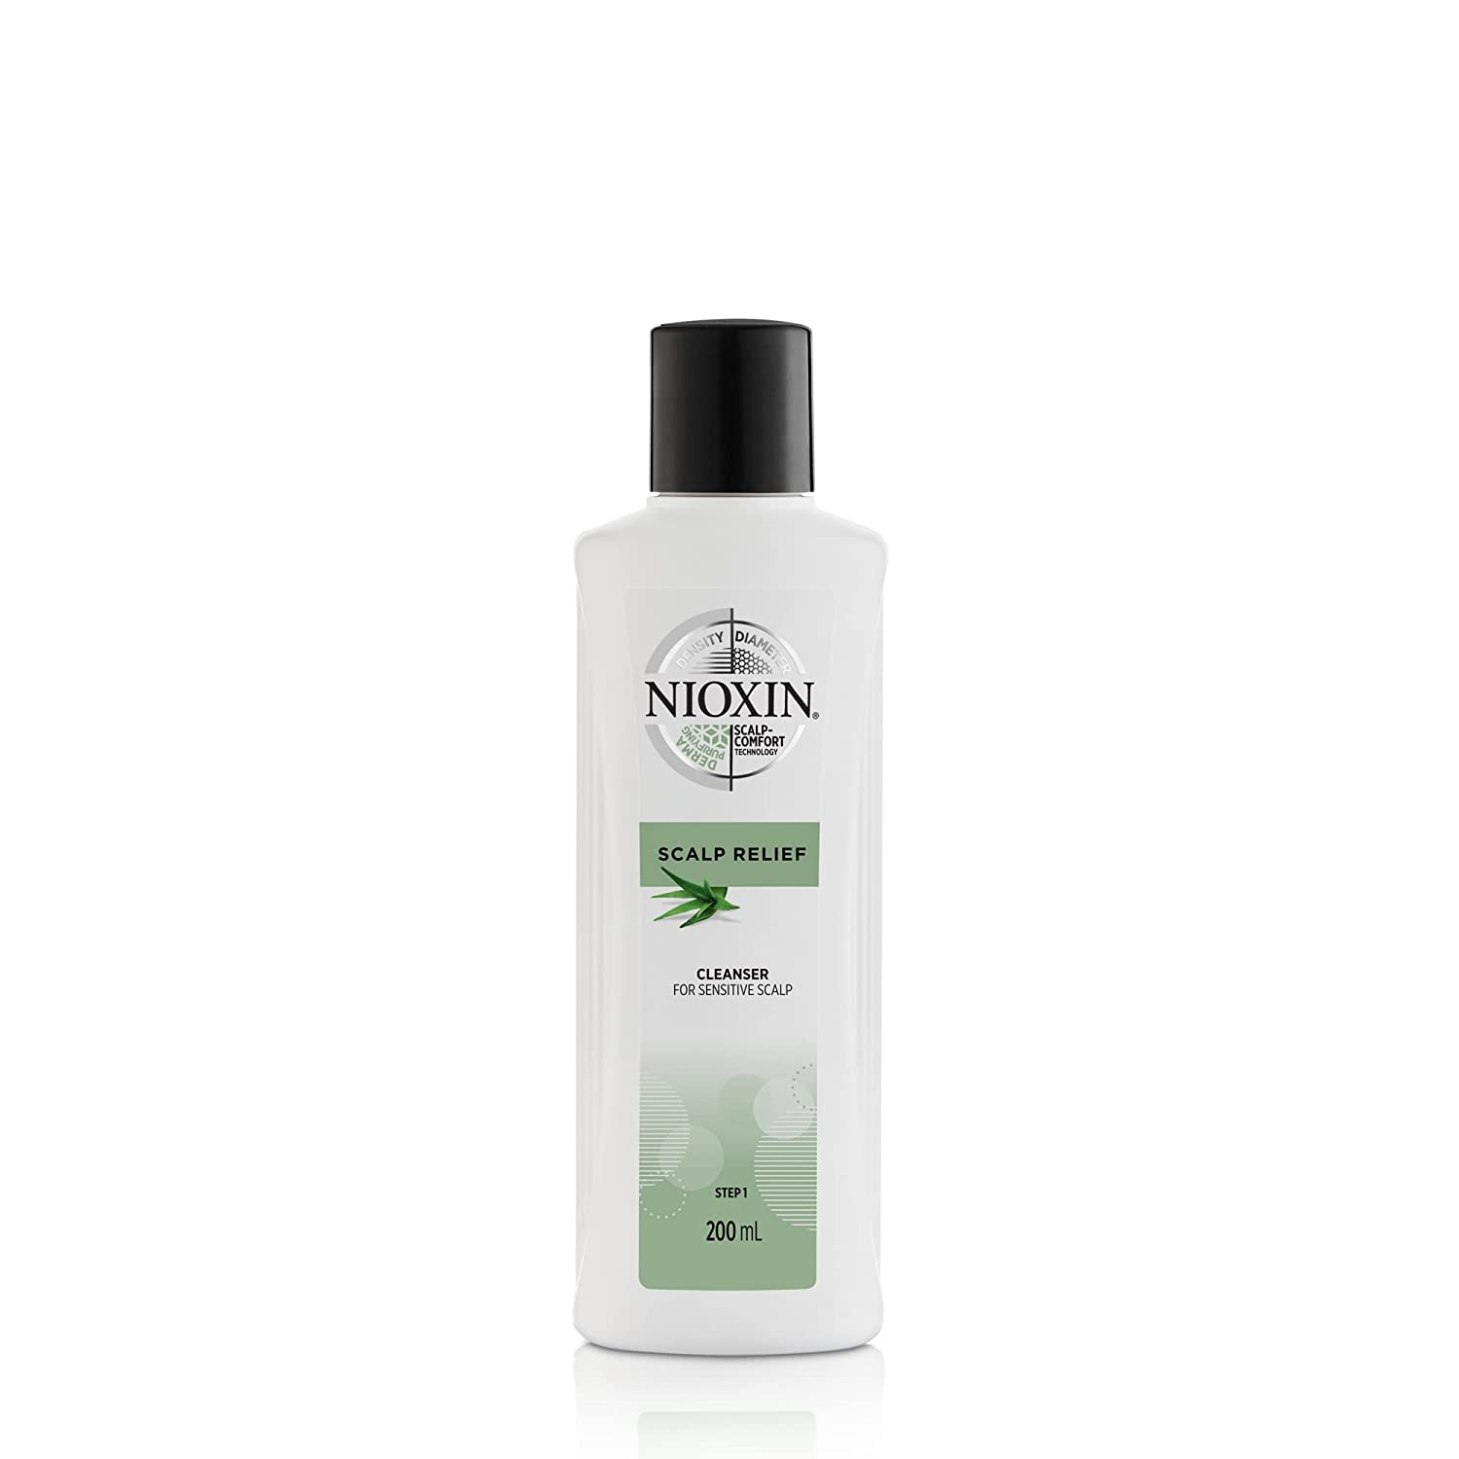 nioxin scalp relief system